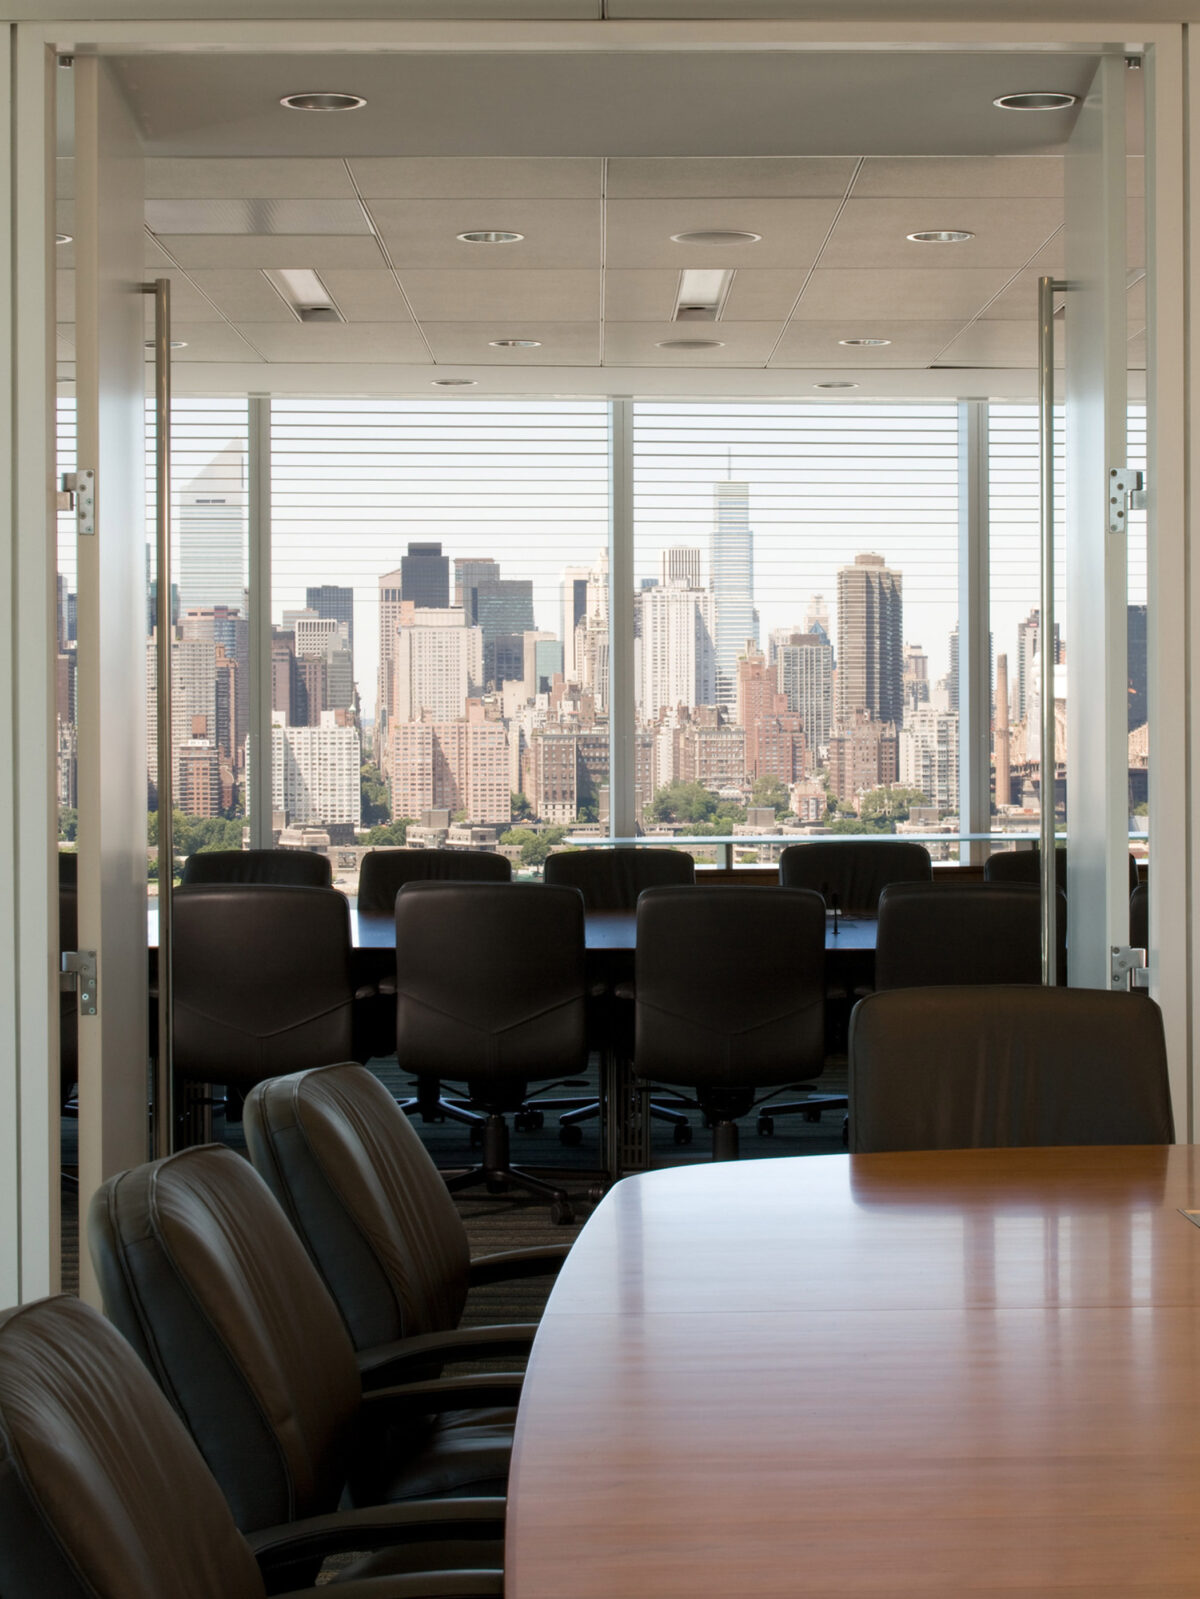 Modern boardroom with sleek, black rolling chairs around a long, polished wooden table, featuring expansive windows that frame a panoramic city skyline view, accentuating the room's natural lighting and urban context.